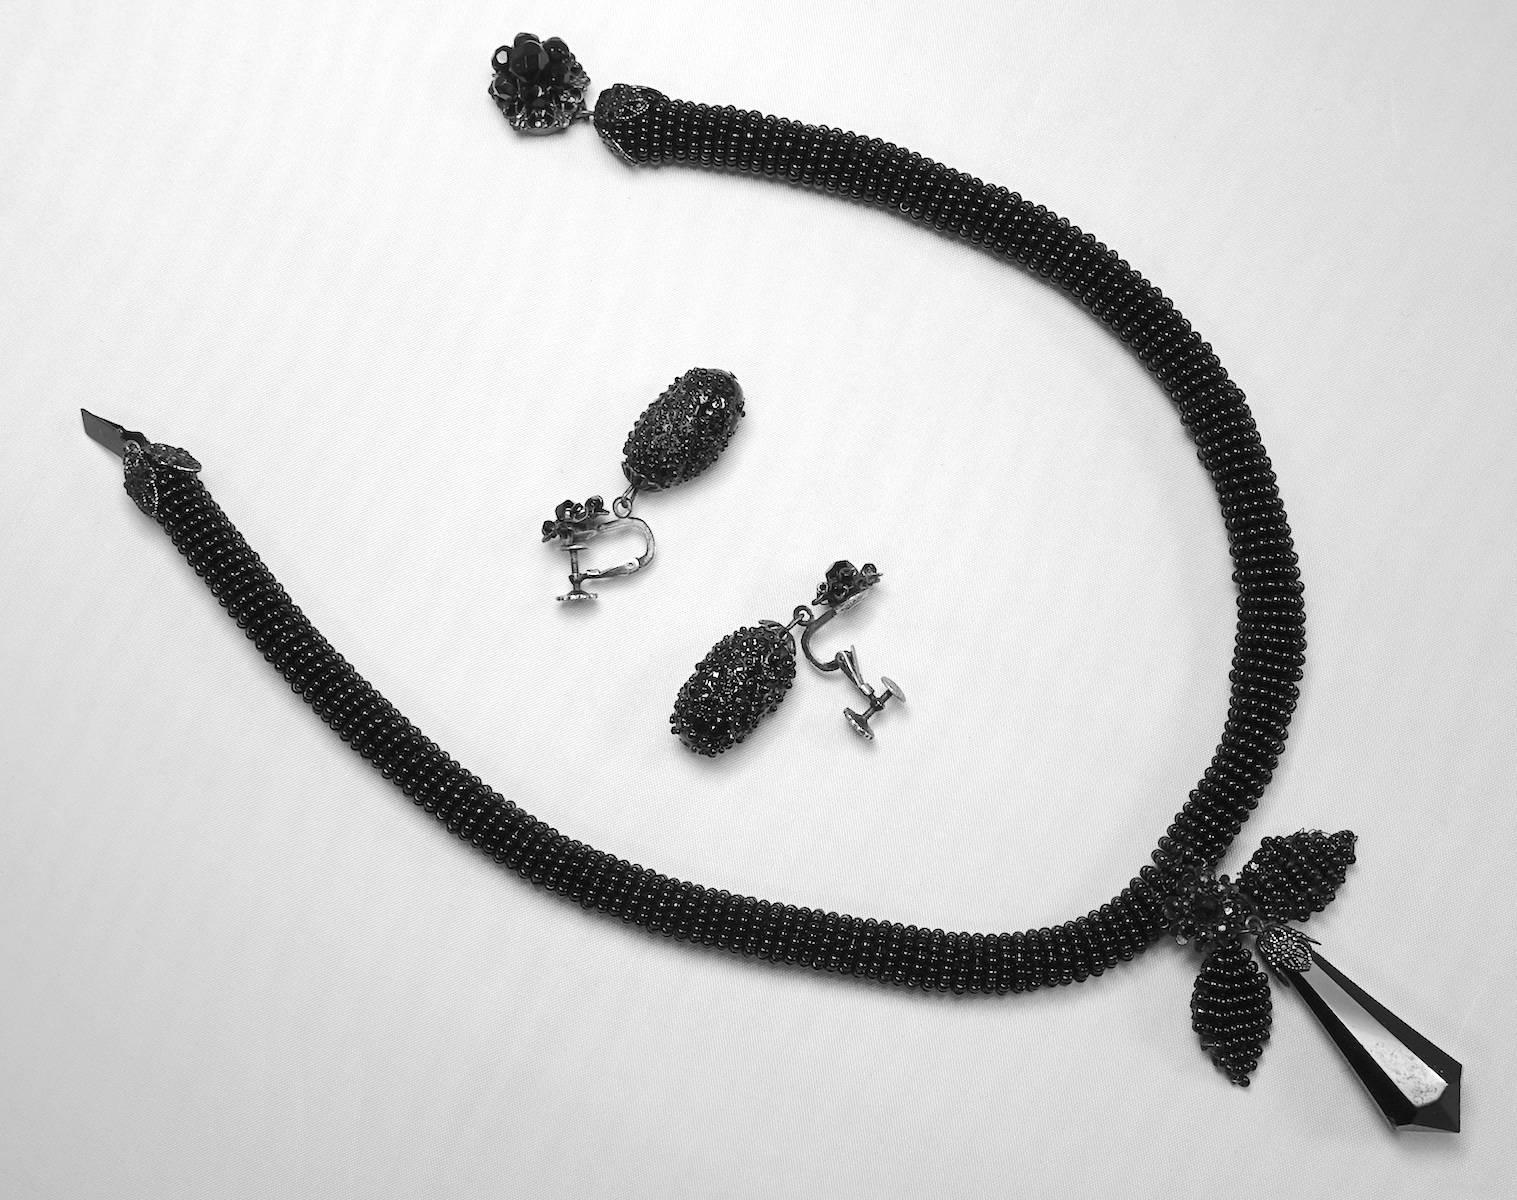 This rare vintage Miriam Haskell necklace and earrings set has tiny black jet seed beads in a japanned setting. The necklace measures 16” x 1/2” with a slide in clasp.  The matching screw-back earrings are 1-1/2” x 1/2”. This set is signed “Miriam